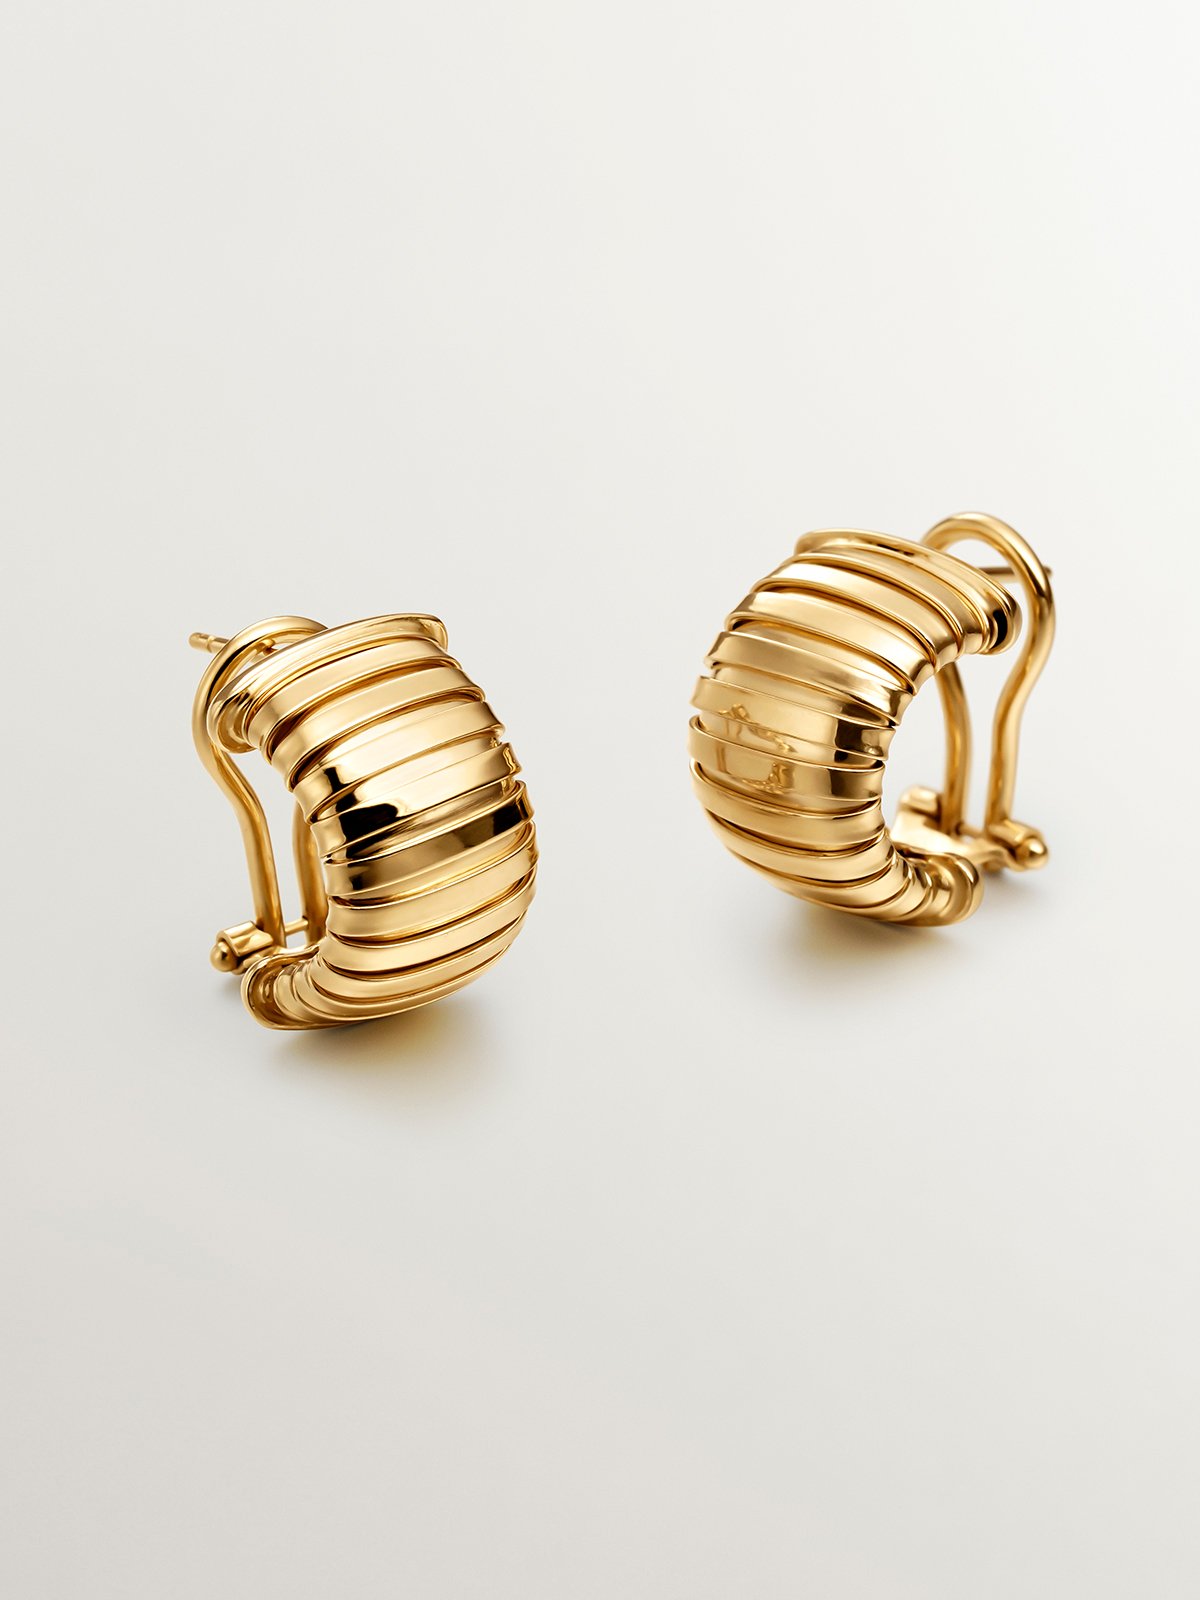 Tubogas earrings in 925 silver plated in 18K yellow gold